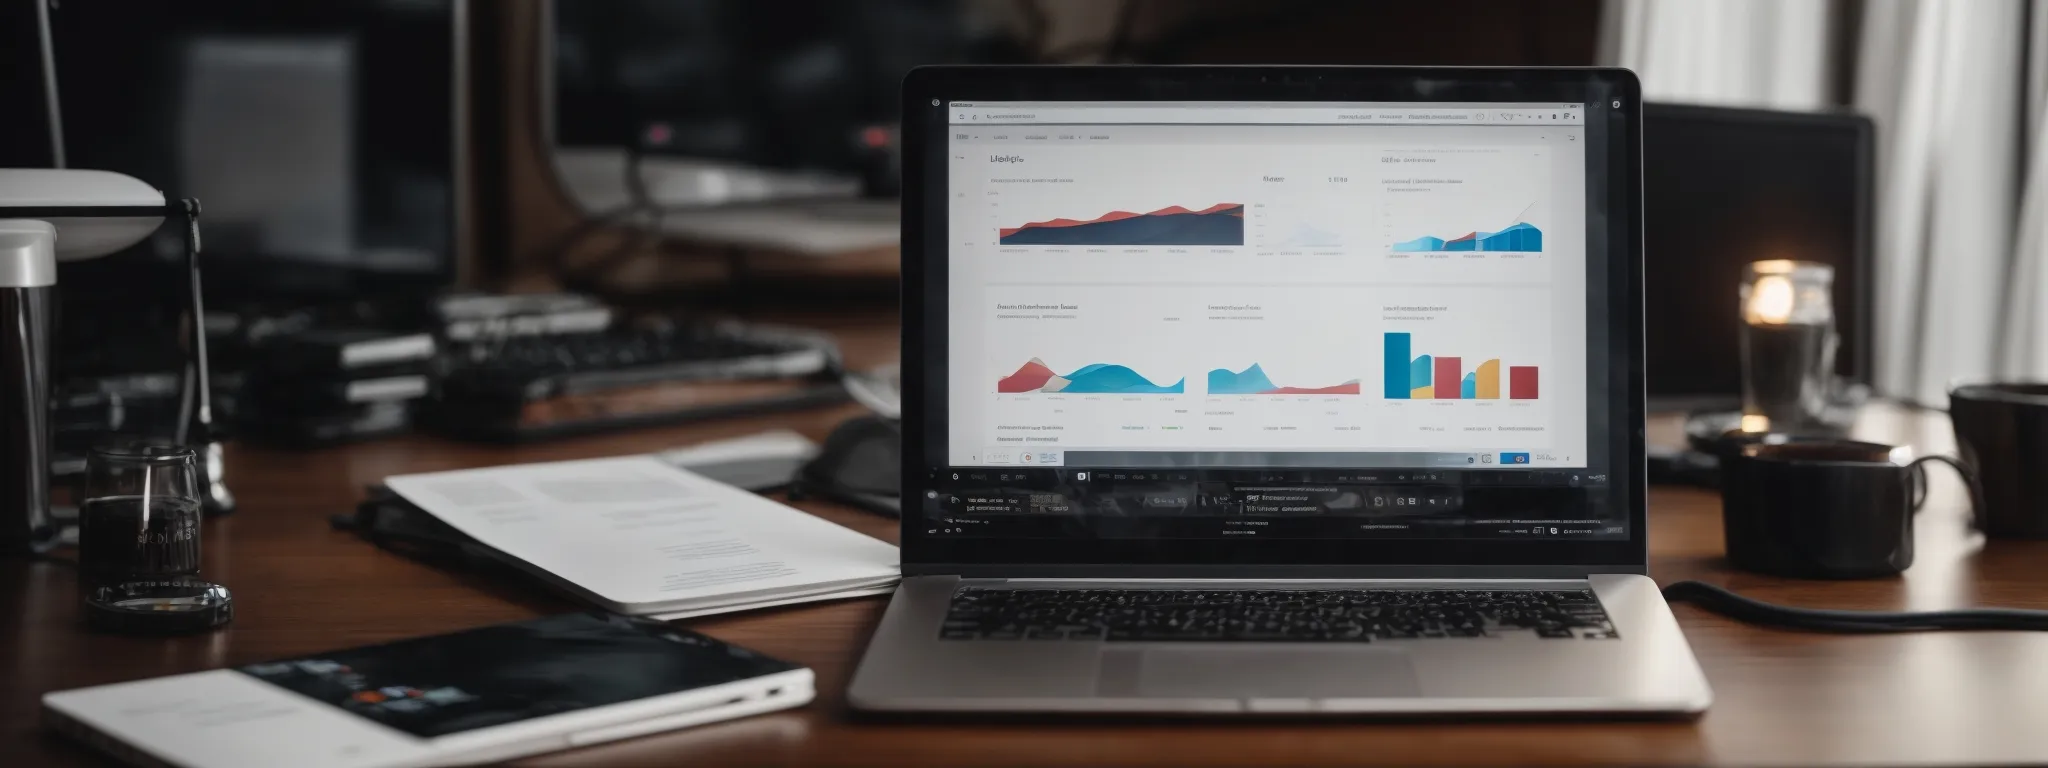 a laptop on a desk displaying graphs and analytics alongside ecommerce website pages.